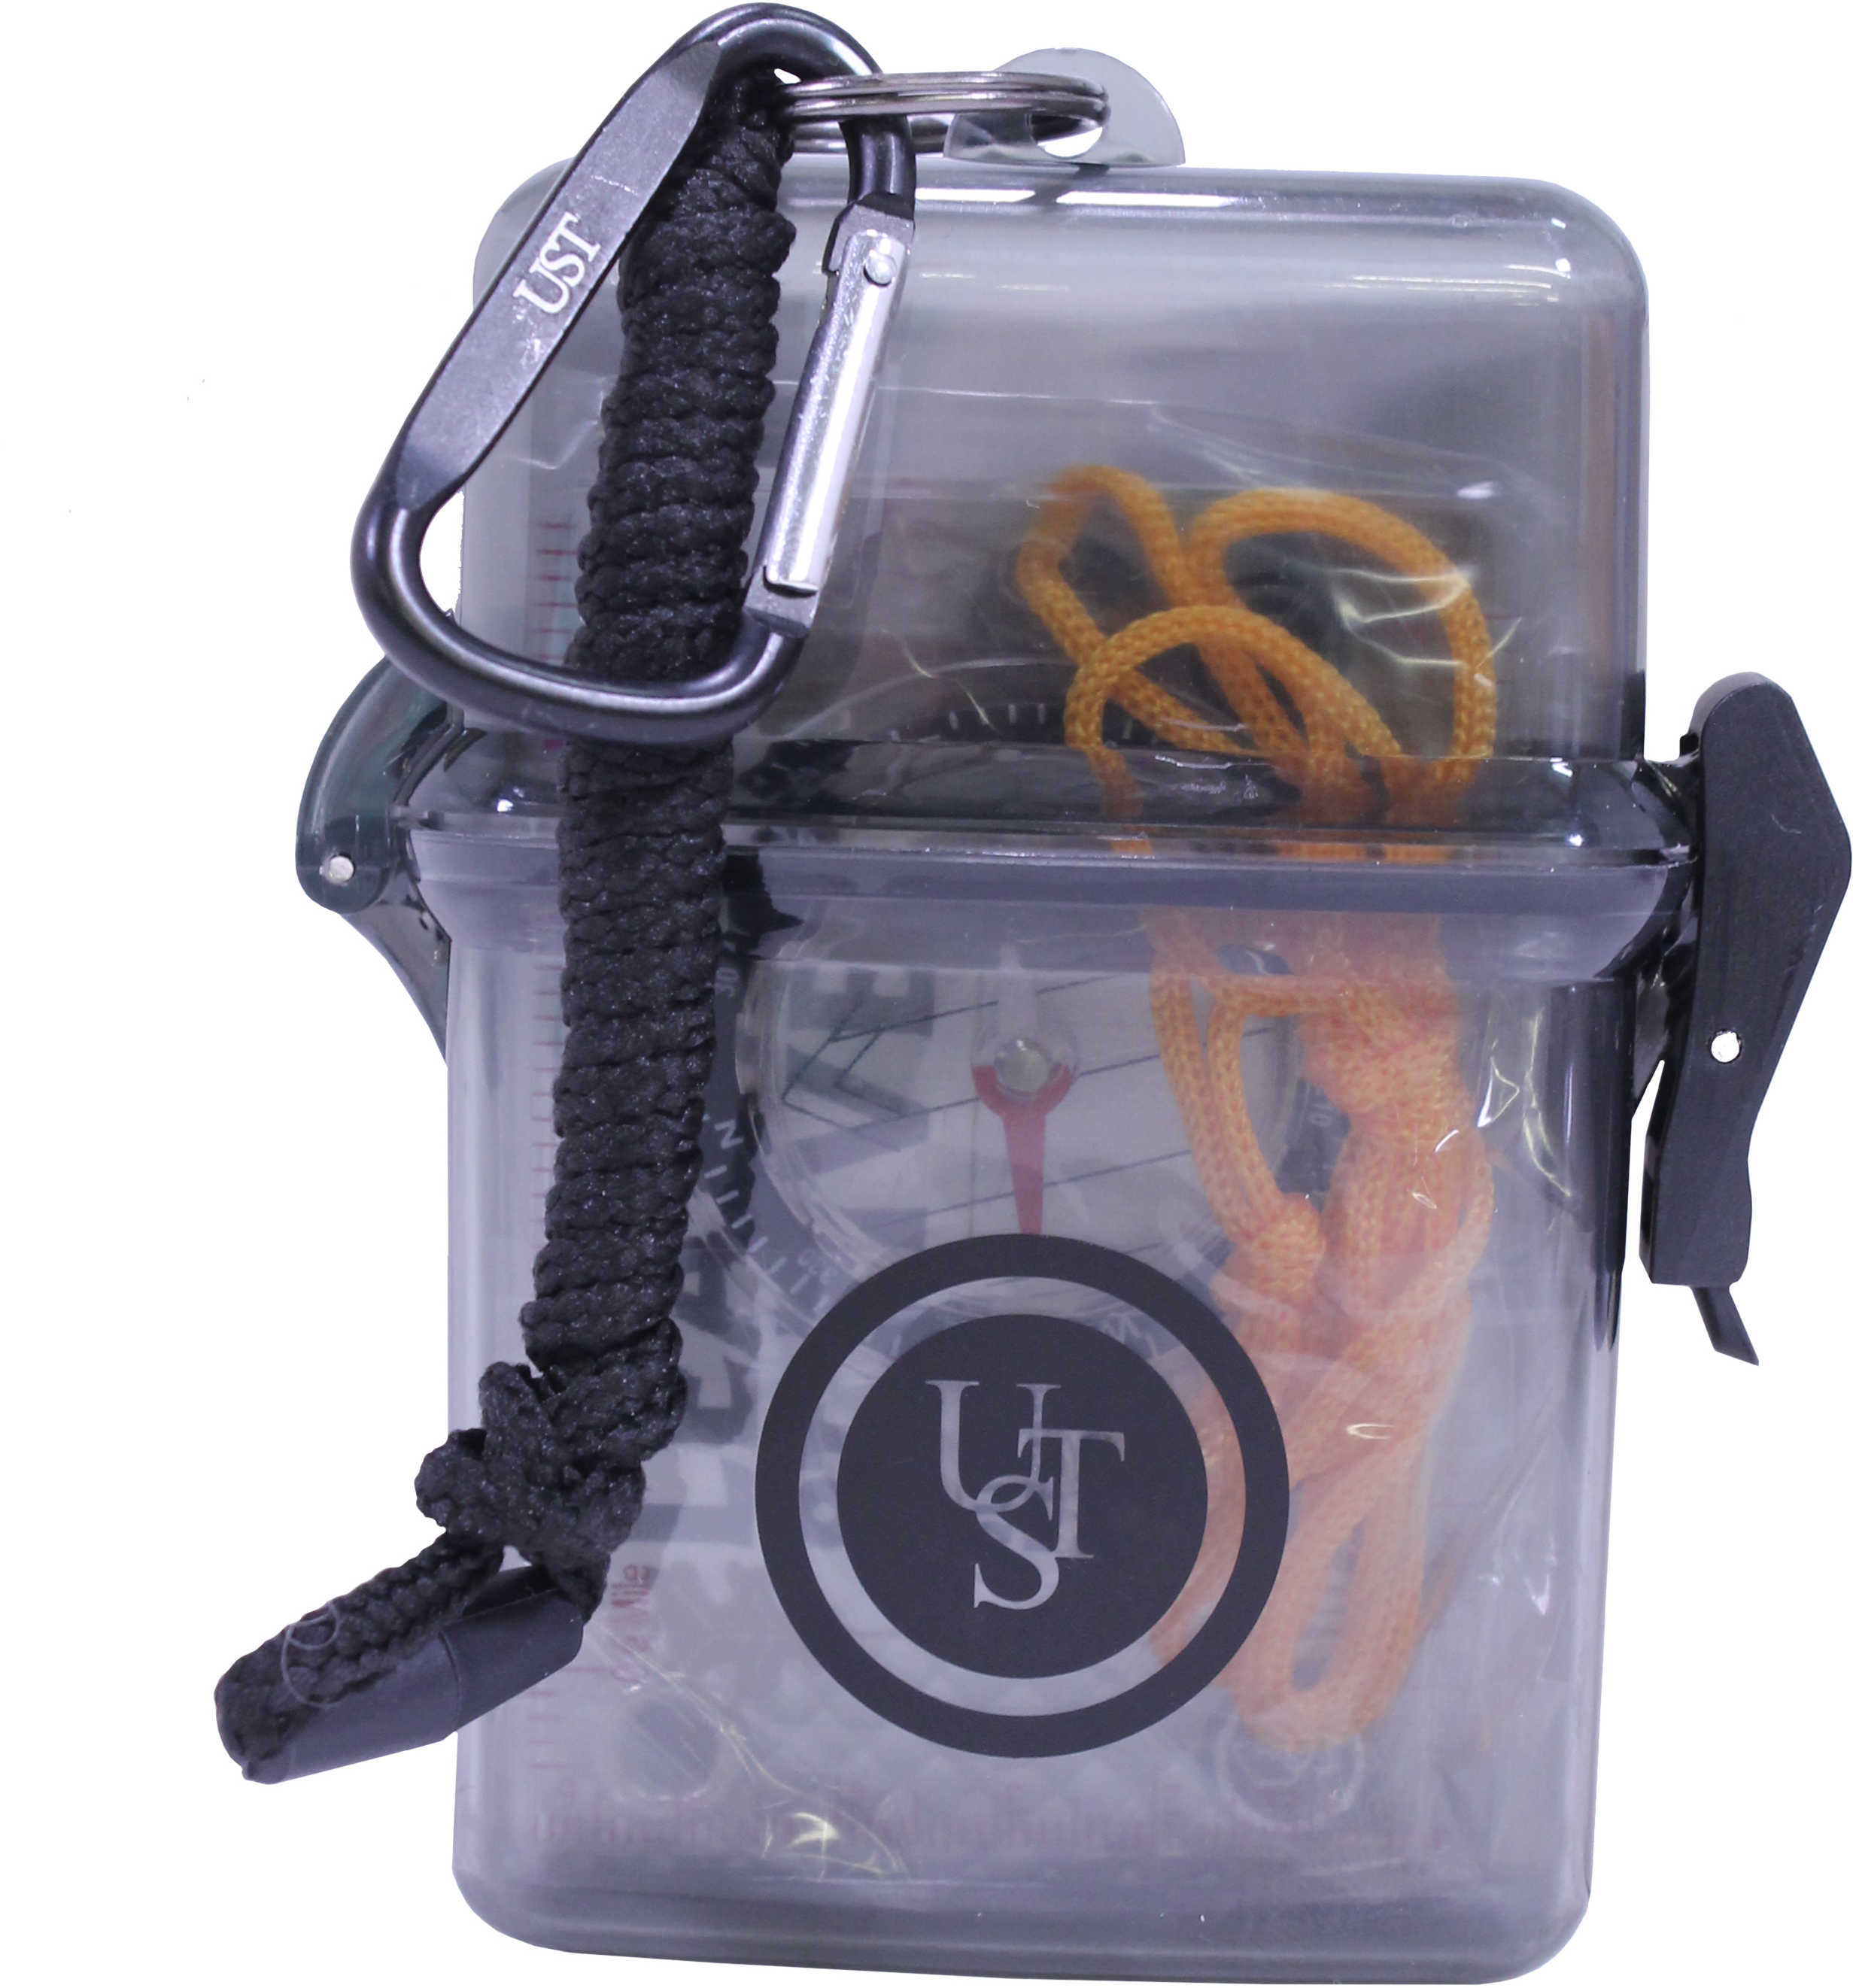 Ultimate Survival Technologies Learn and Live Wayfinding Kit Md: 20-02758